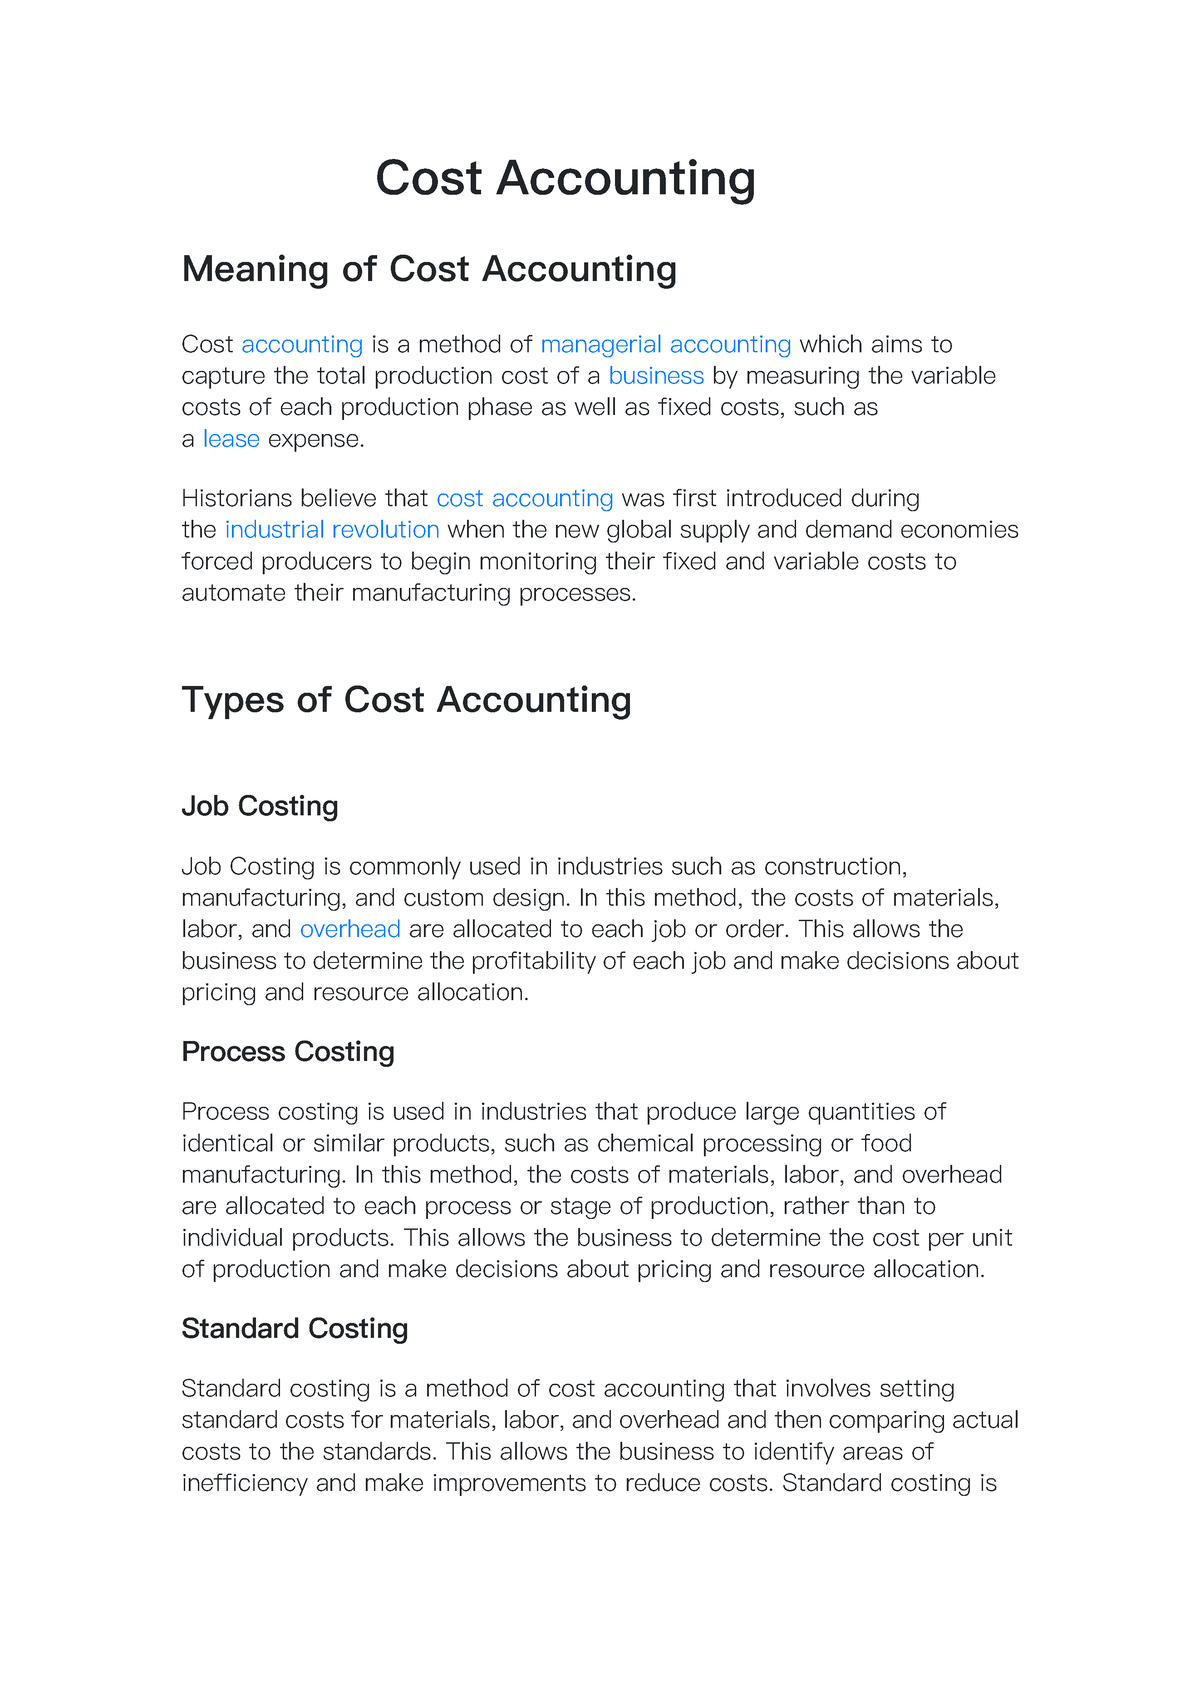 cost accounting essay definition